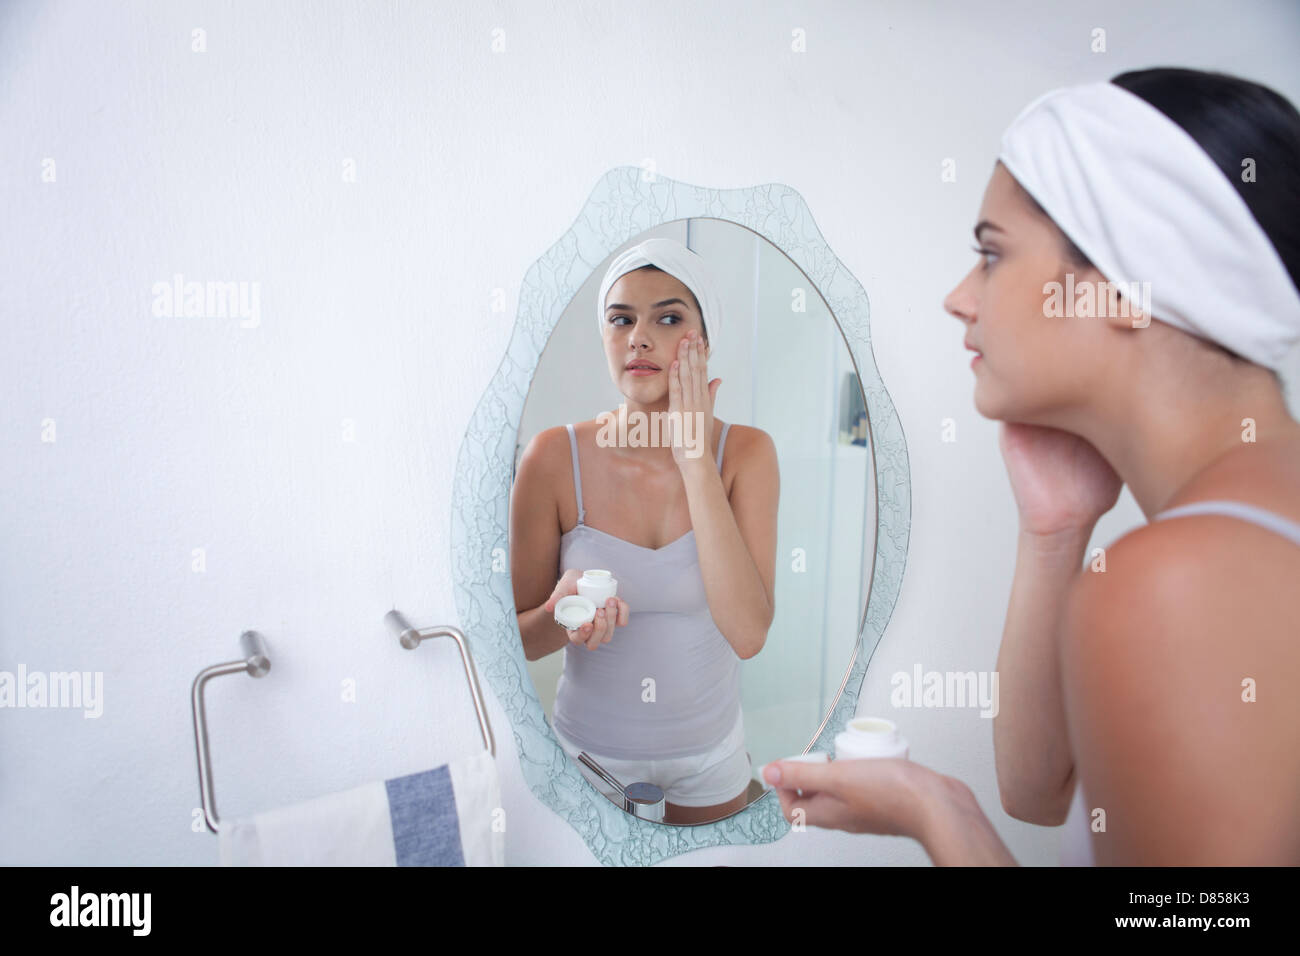 young woman applying face cream. Stock Photo